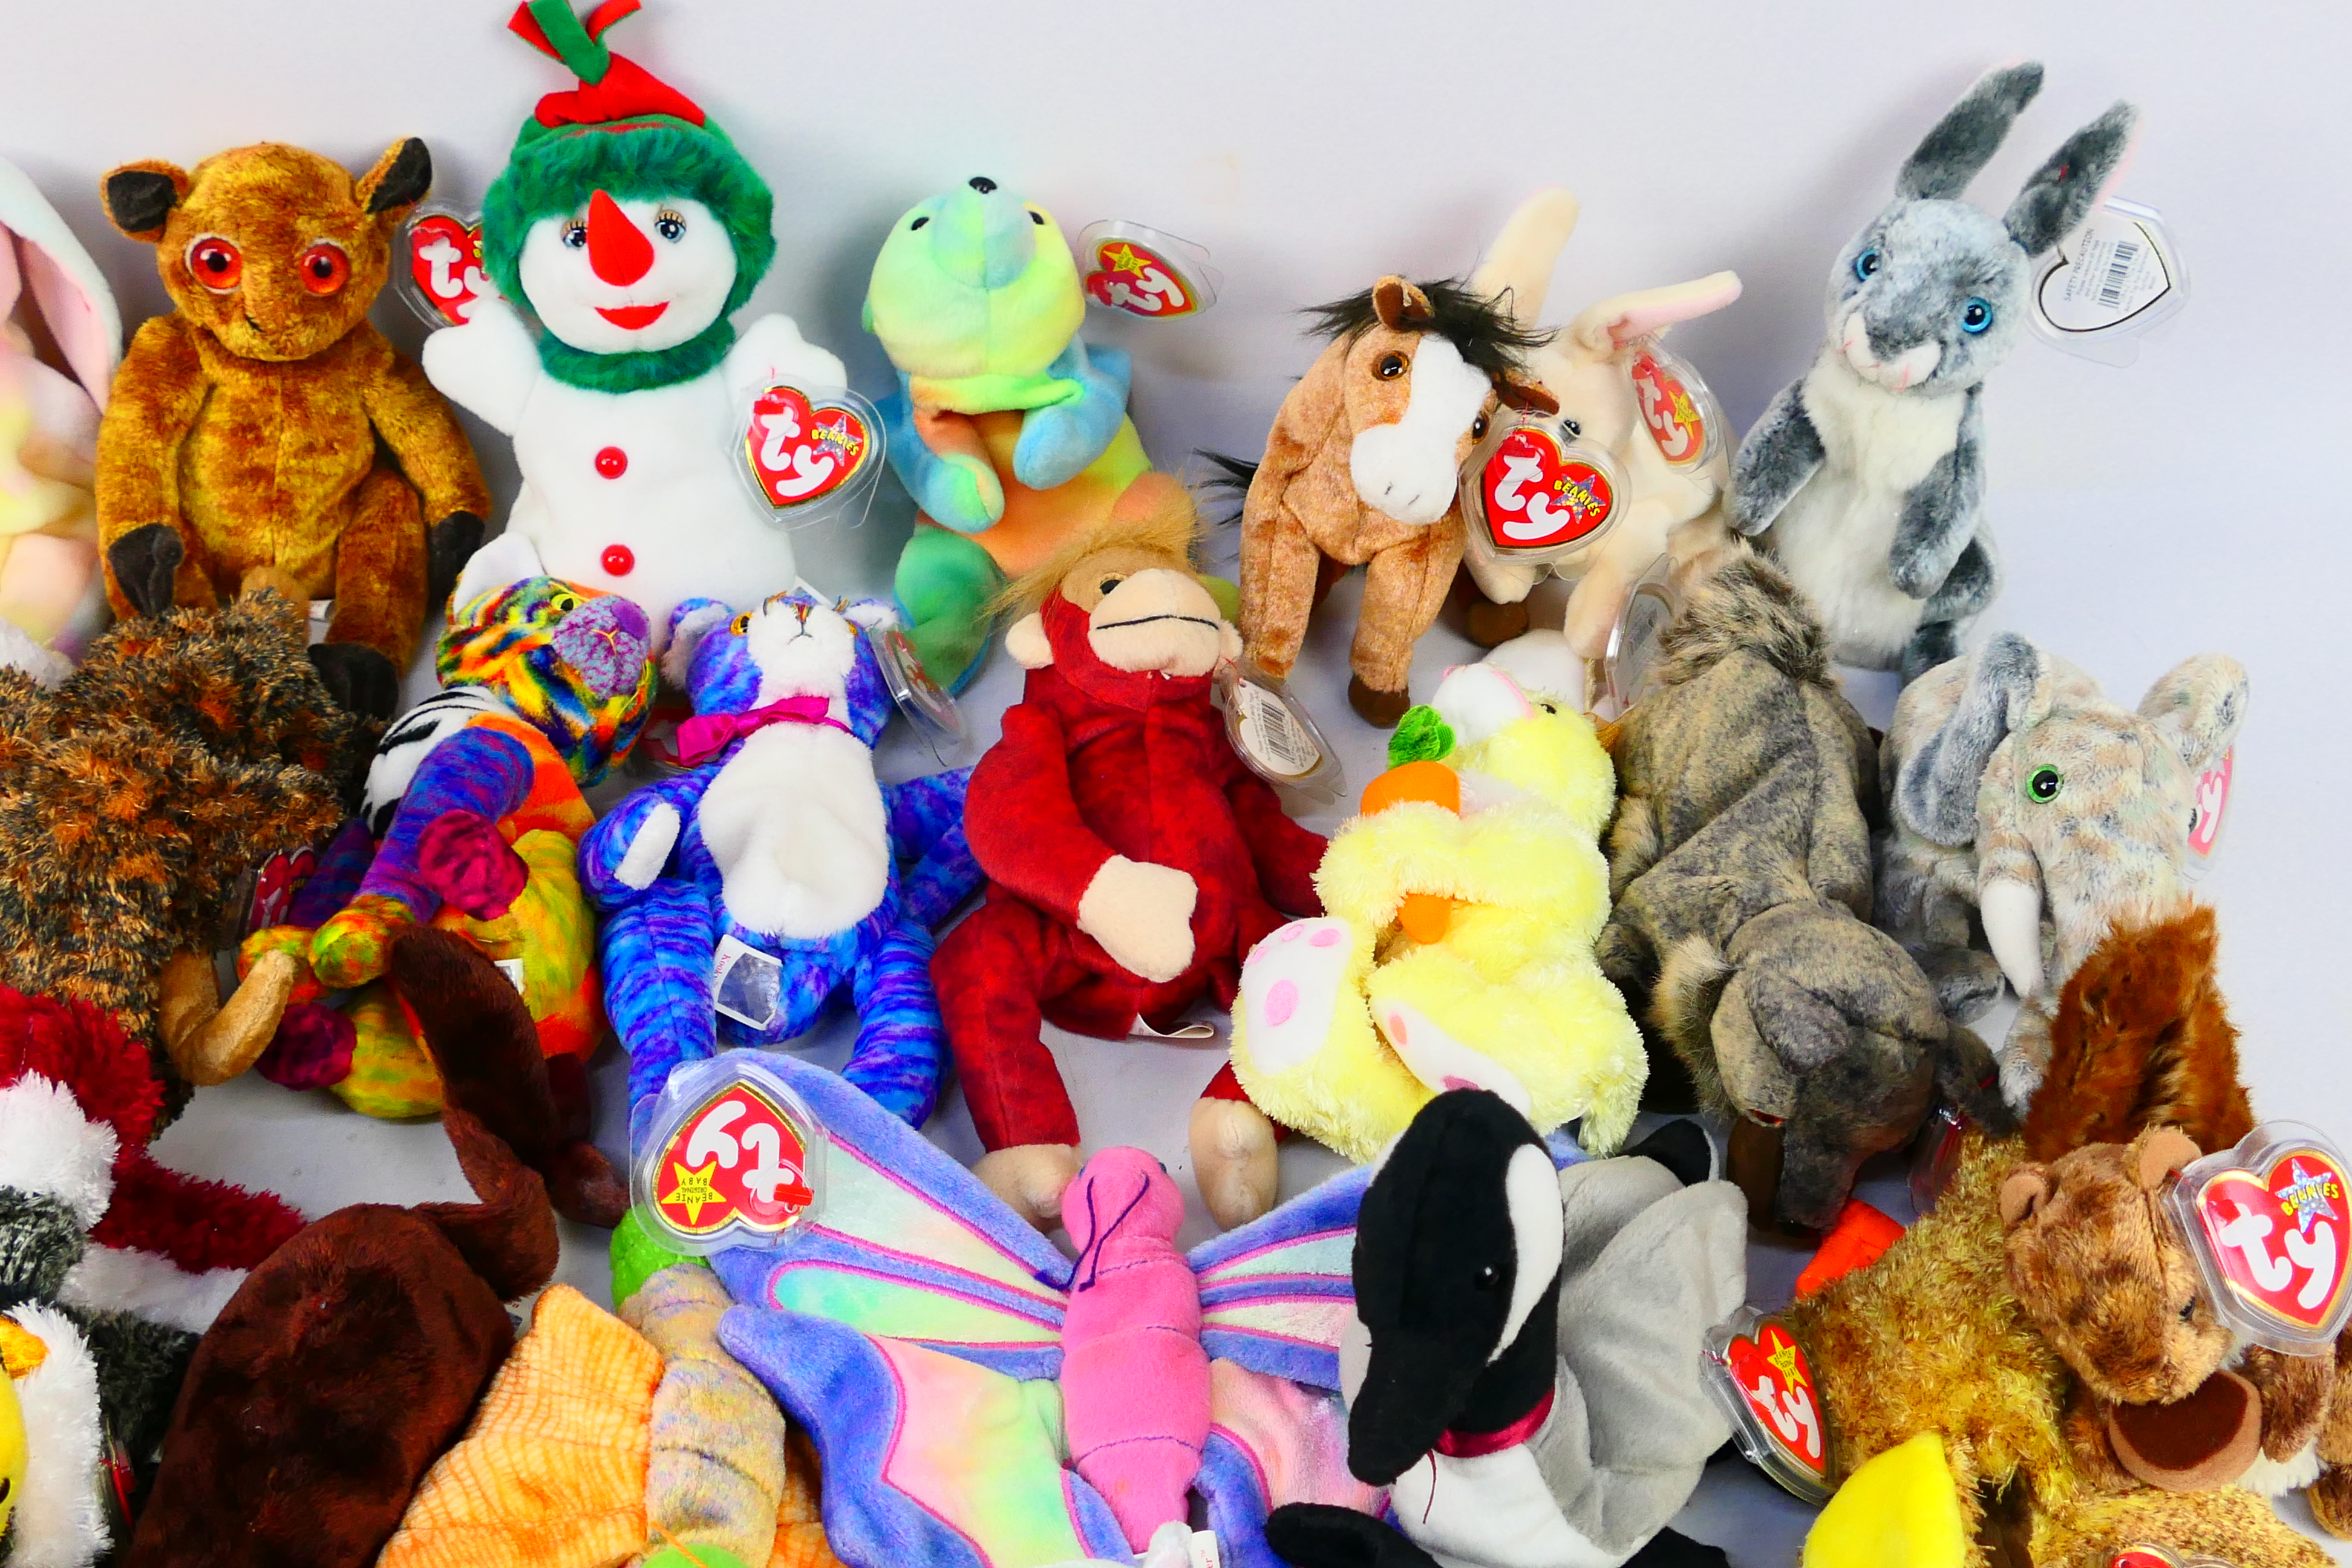 TY Beanie Babies - Approx 30 TY Beanie babies to include Turk-e, Duck-e and Scared-e (all E beanie). - Image 3 of 5